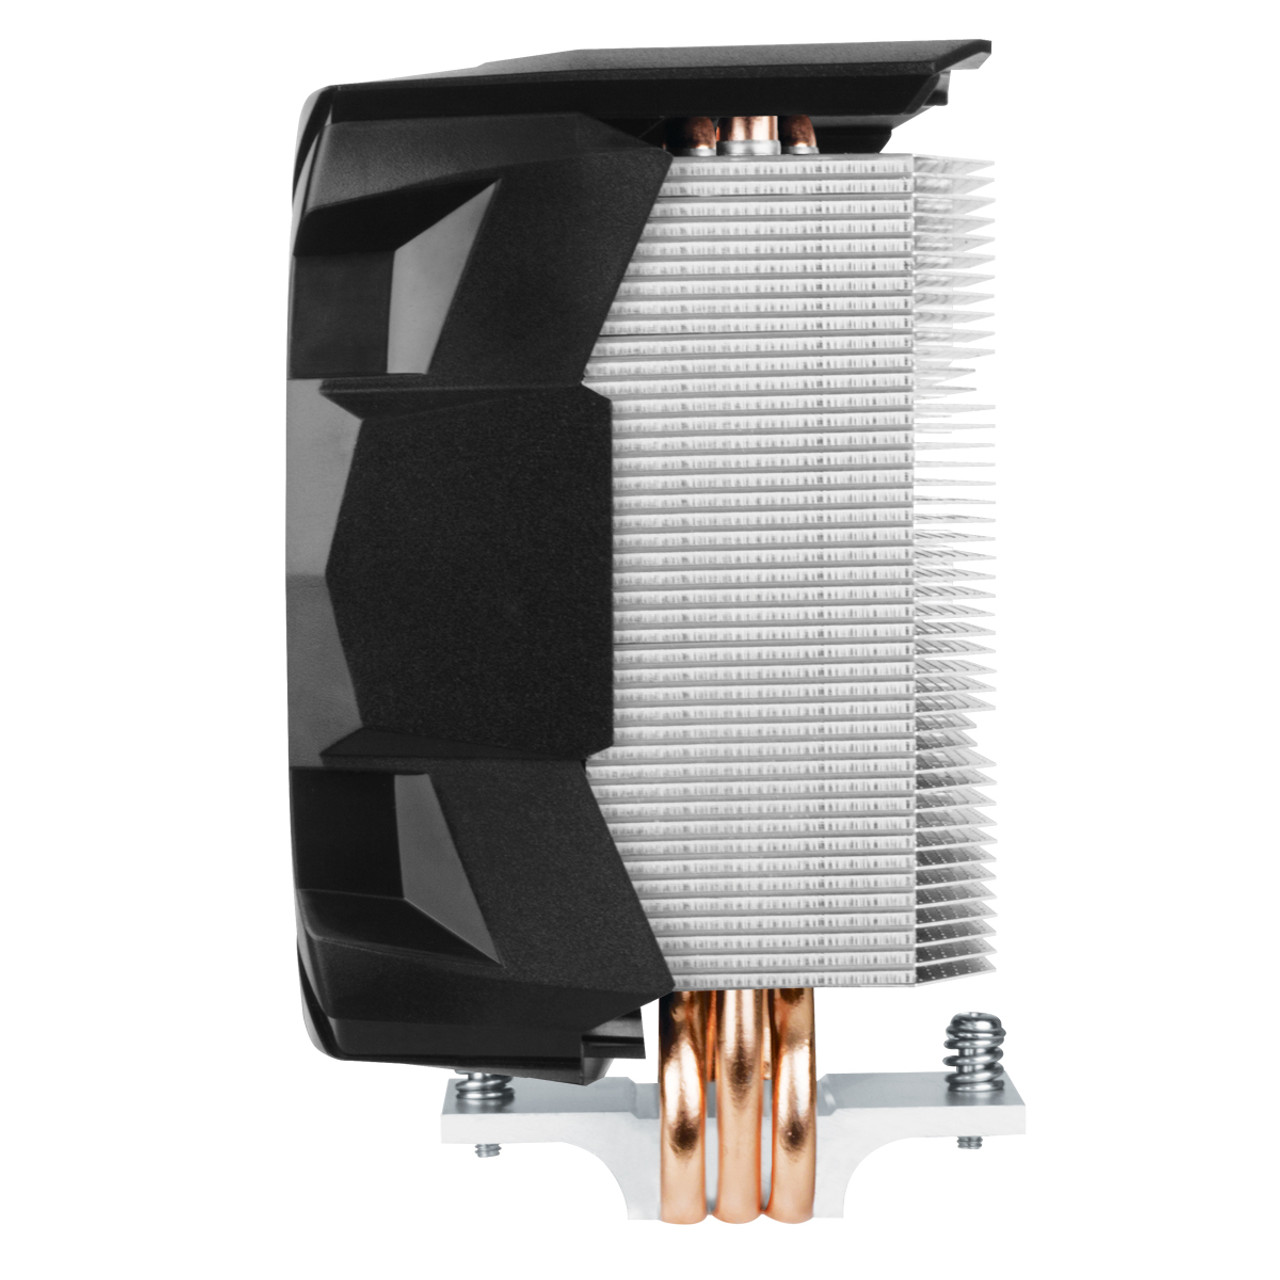 Arctic Freezer A13 X - Compact AMD CPU Cooler, 100 mm, 300-2000 RPM (Controlled by PWM), Fluid Dynamic Bearing, Pre-Applied MX-2 Thermal Paste (Black)